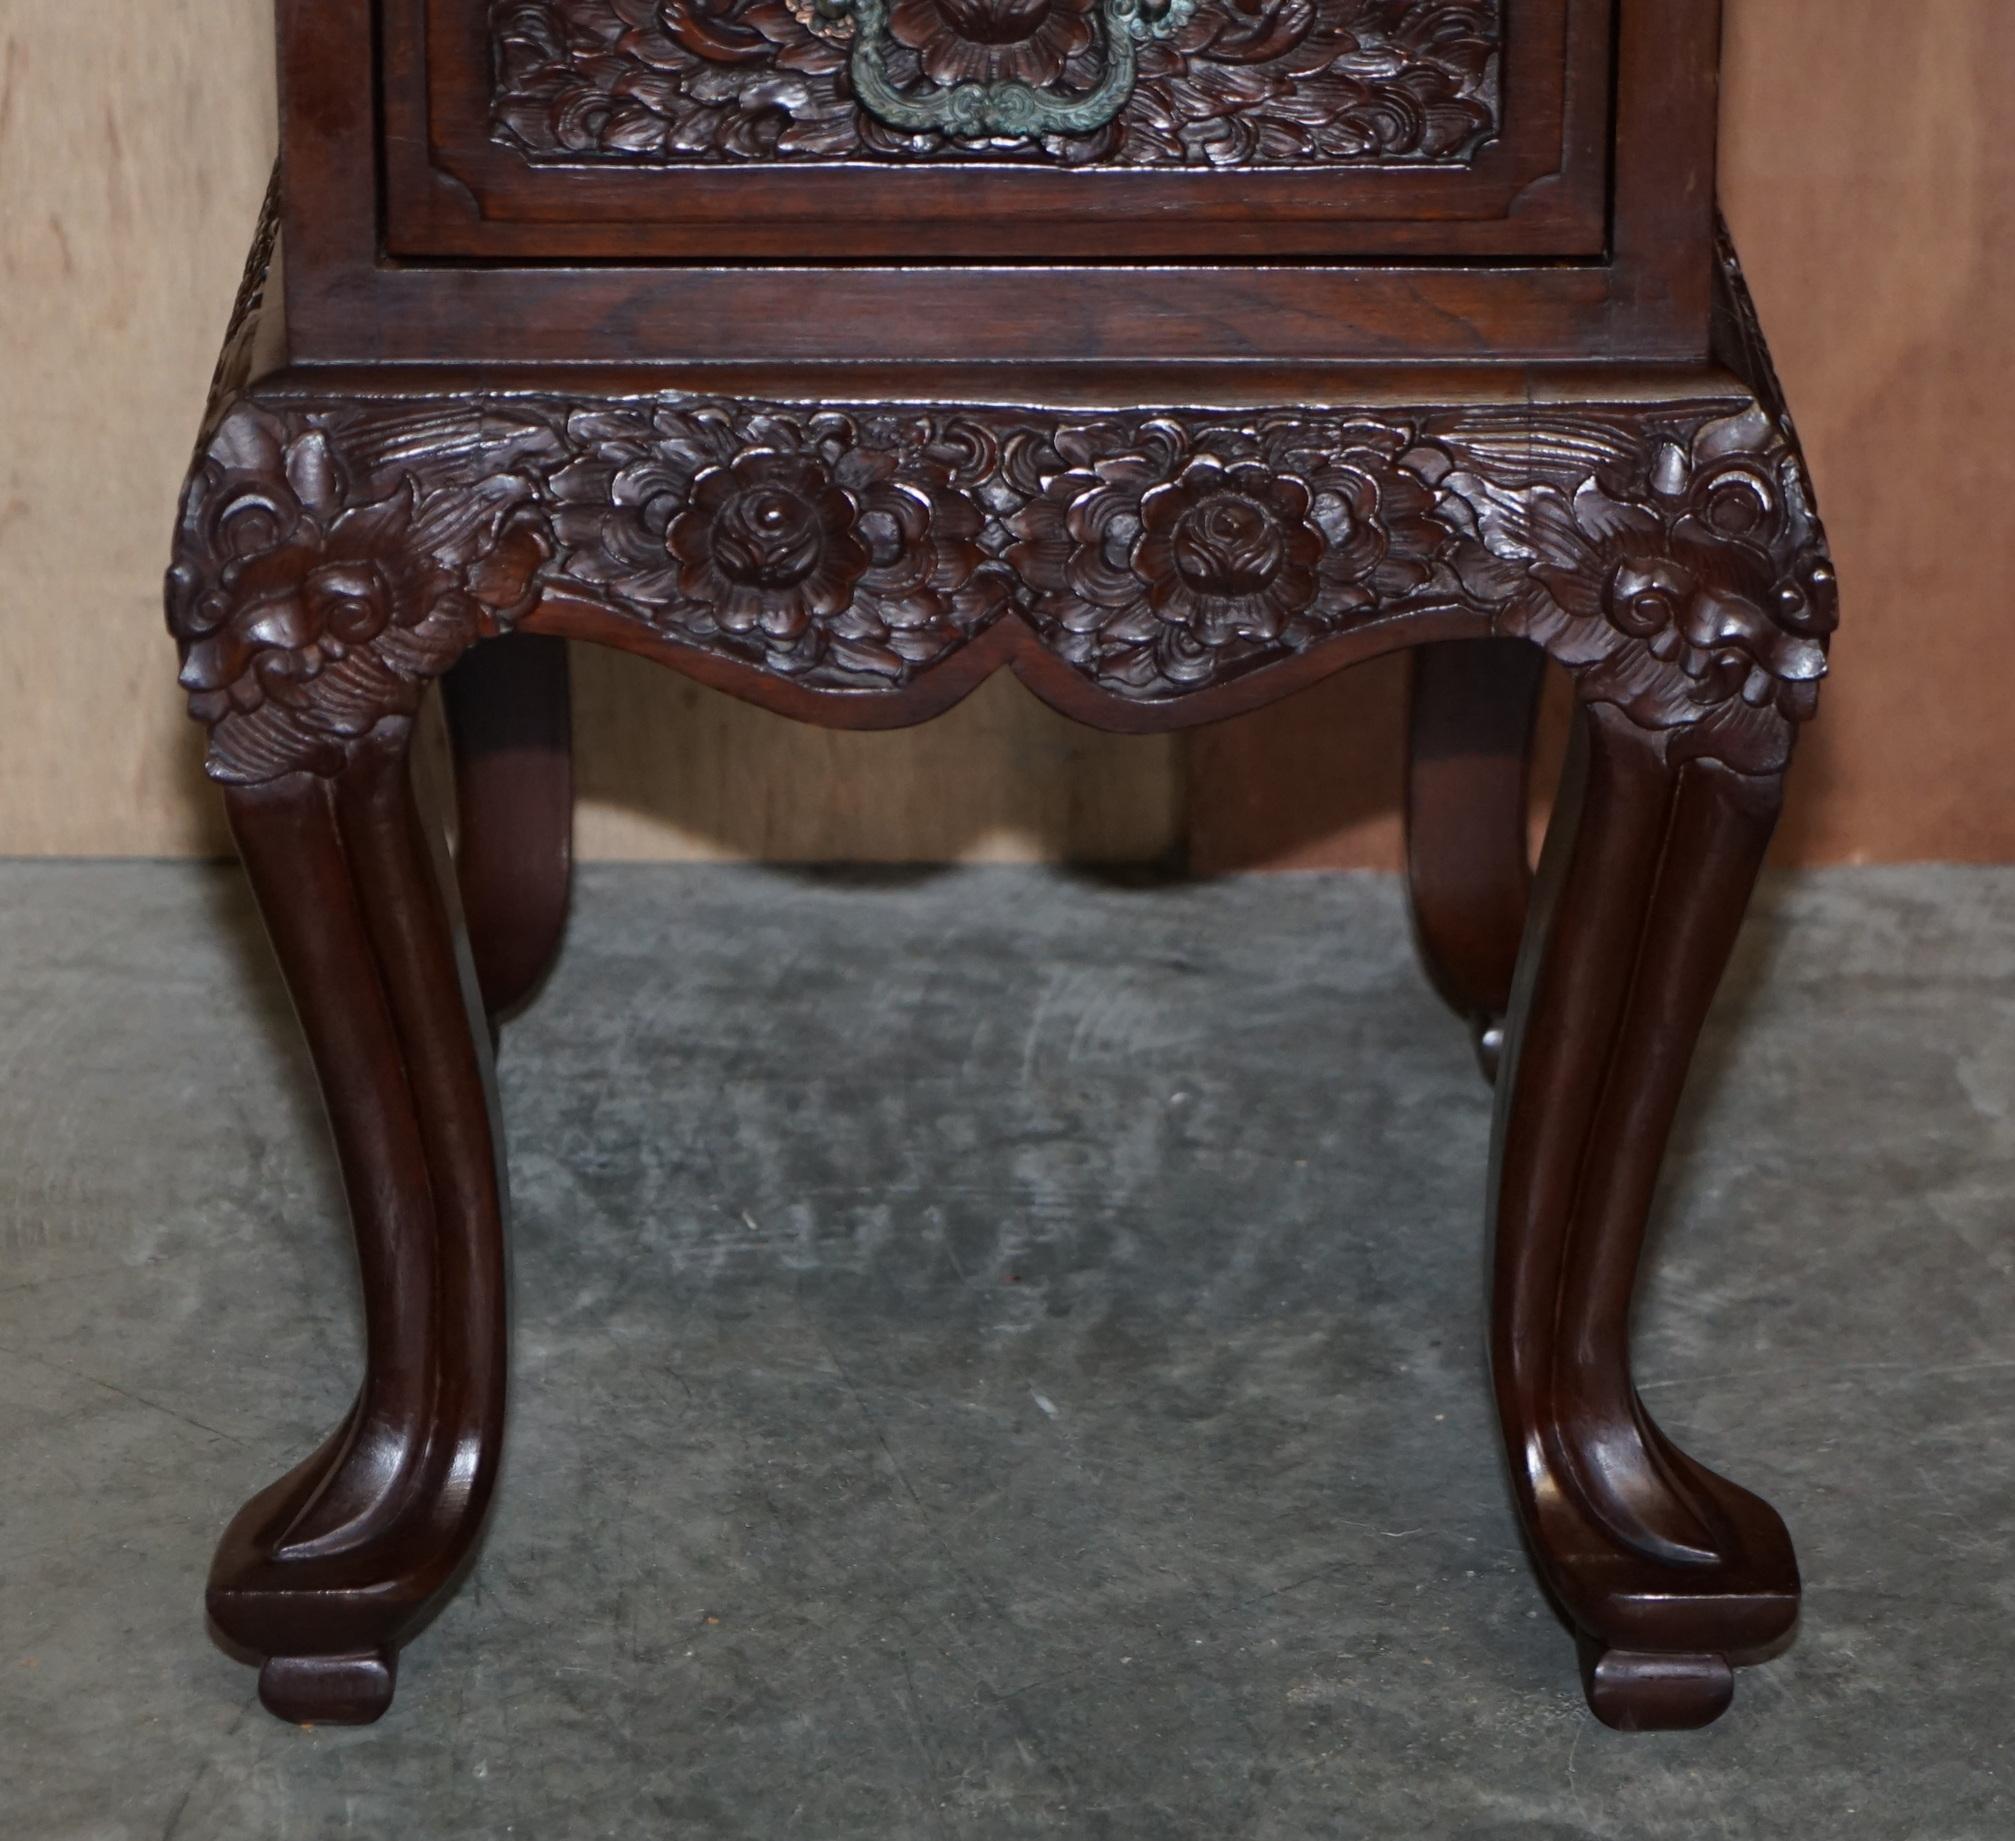 Victorian Heavily Carved Floral Decorated Indian Hardwood Dressing Table & Mirror For Sale